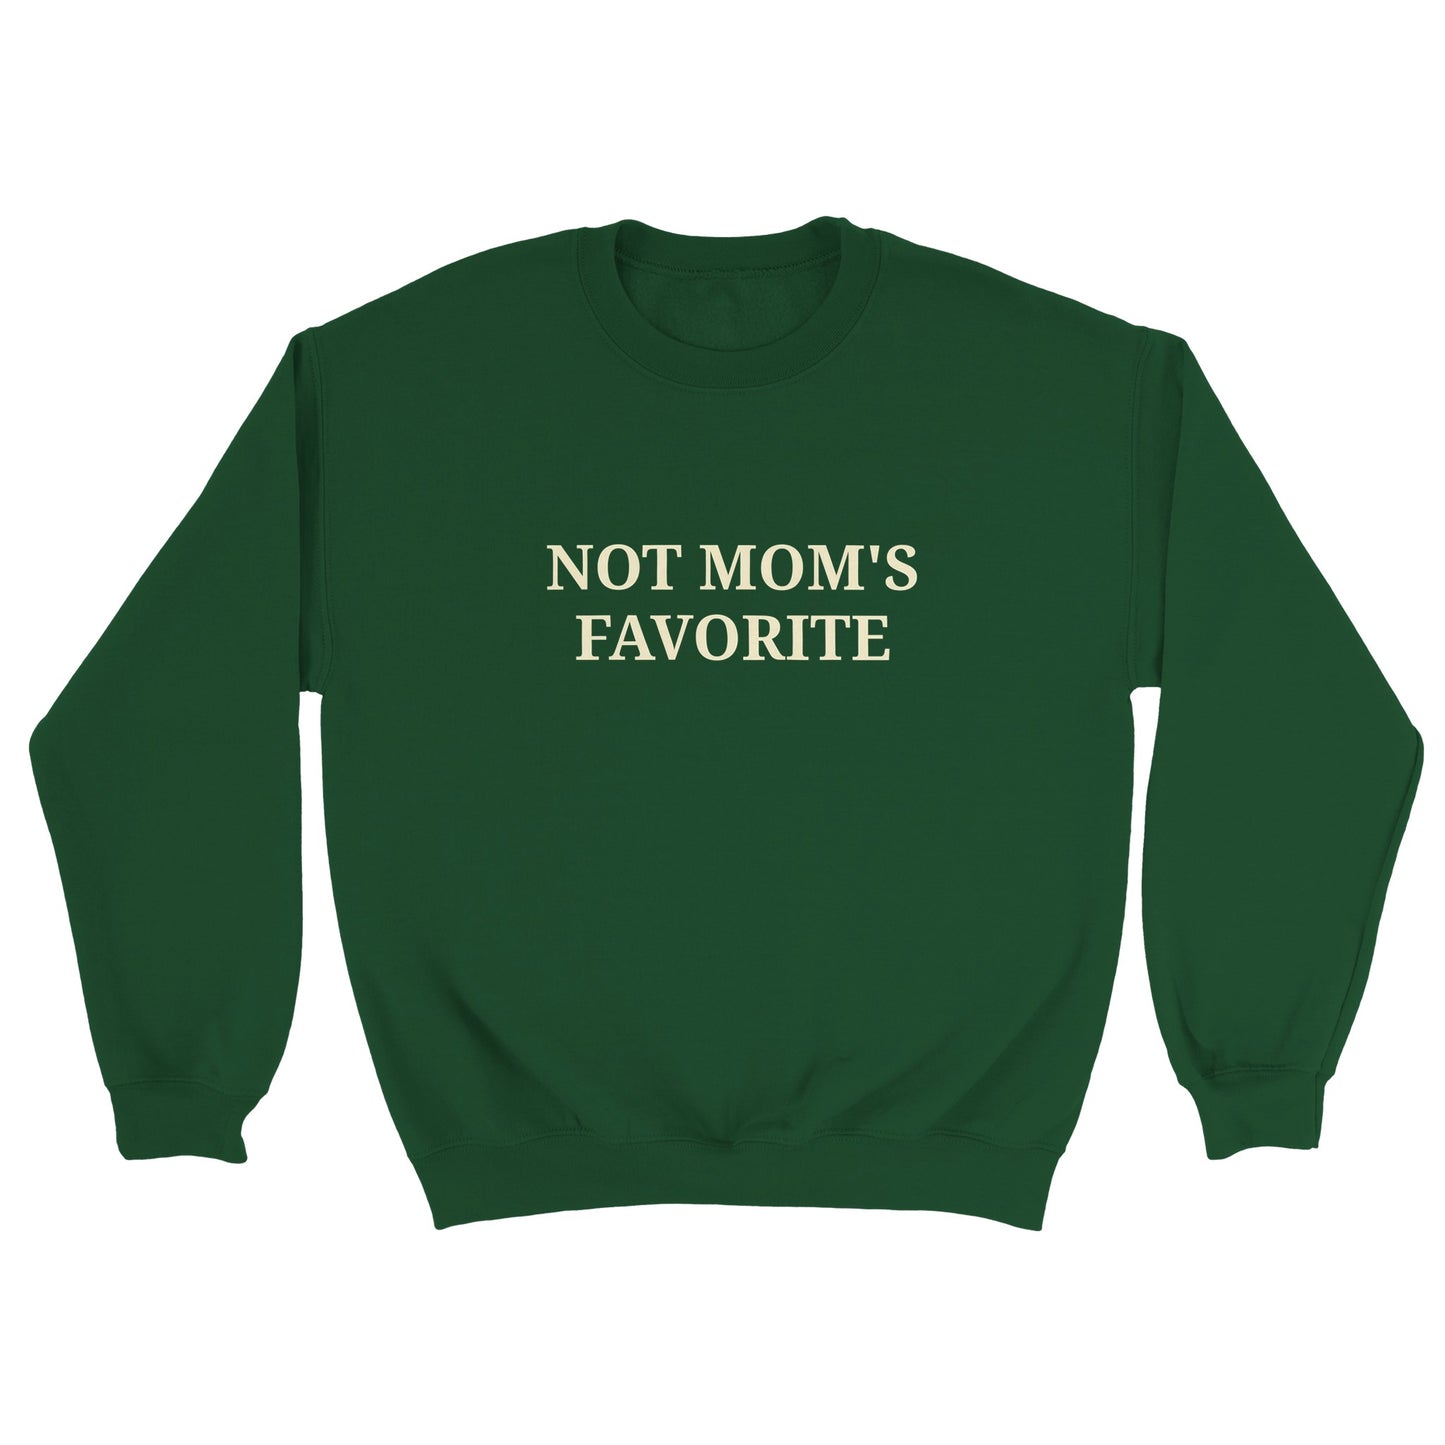 a green sweatshirt with "Not mom's favorite" written across the chest